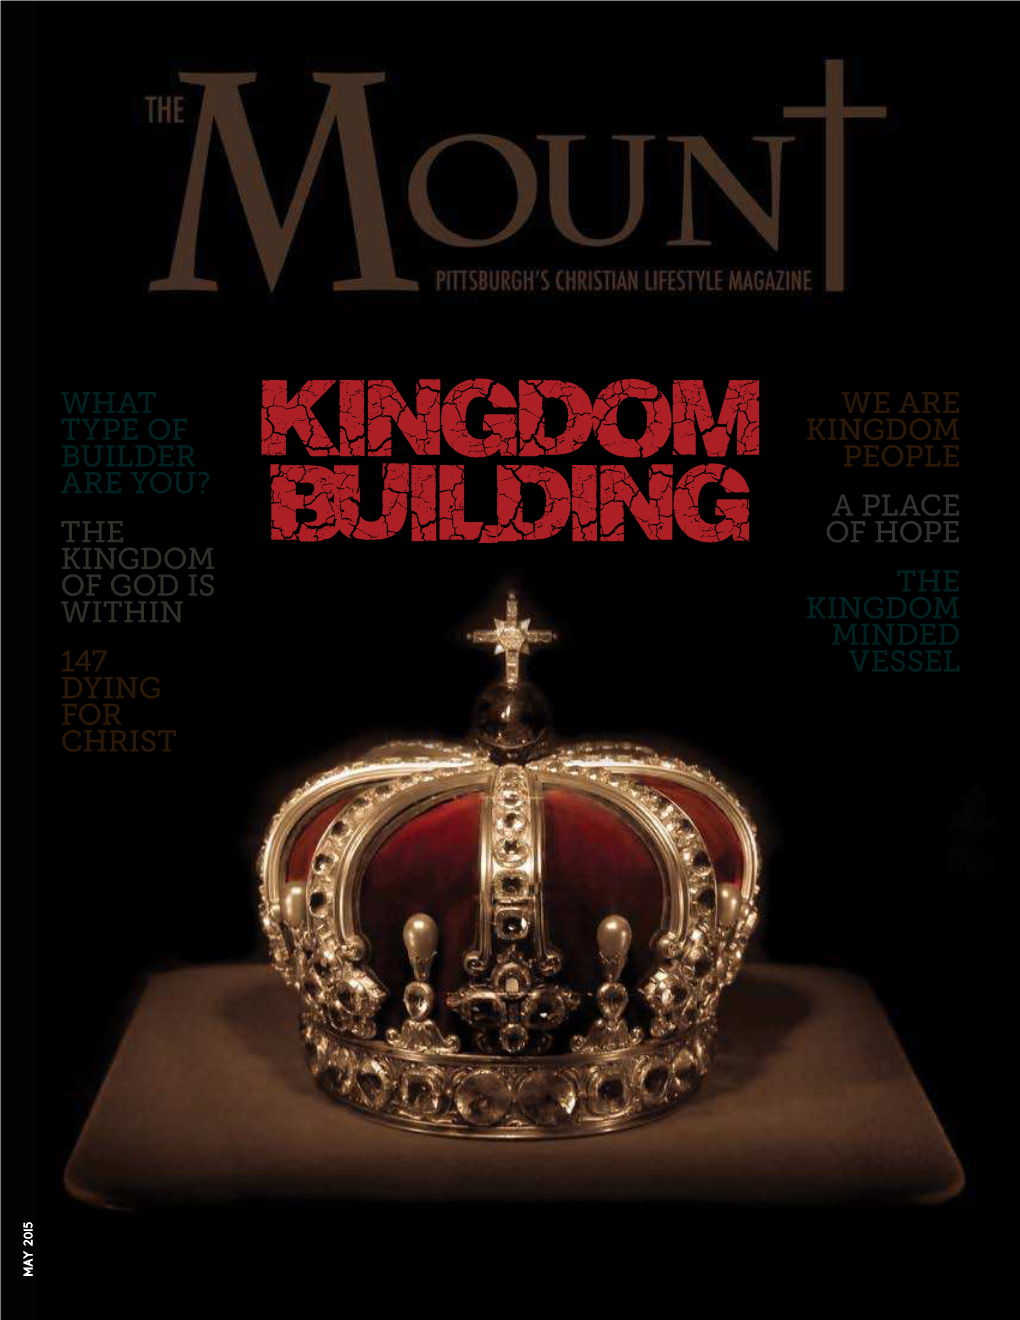 Kingdom Building Kingdom Kingdom Kingdom Kingdom of Hope of Minded Minded a Place We Are Are We People People Vessel Vessel the The